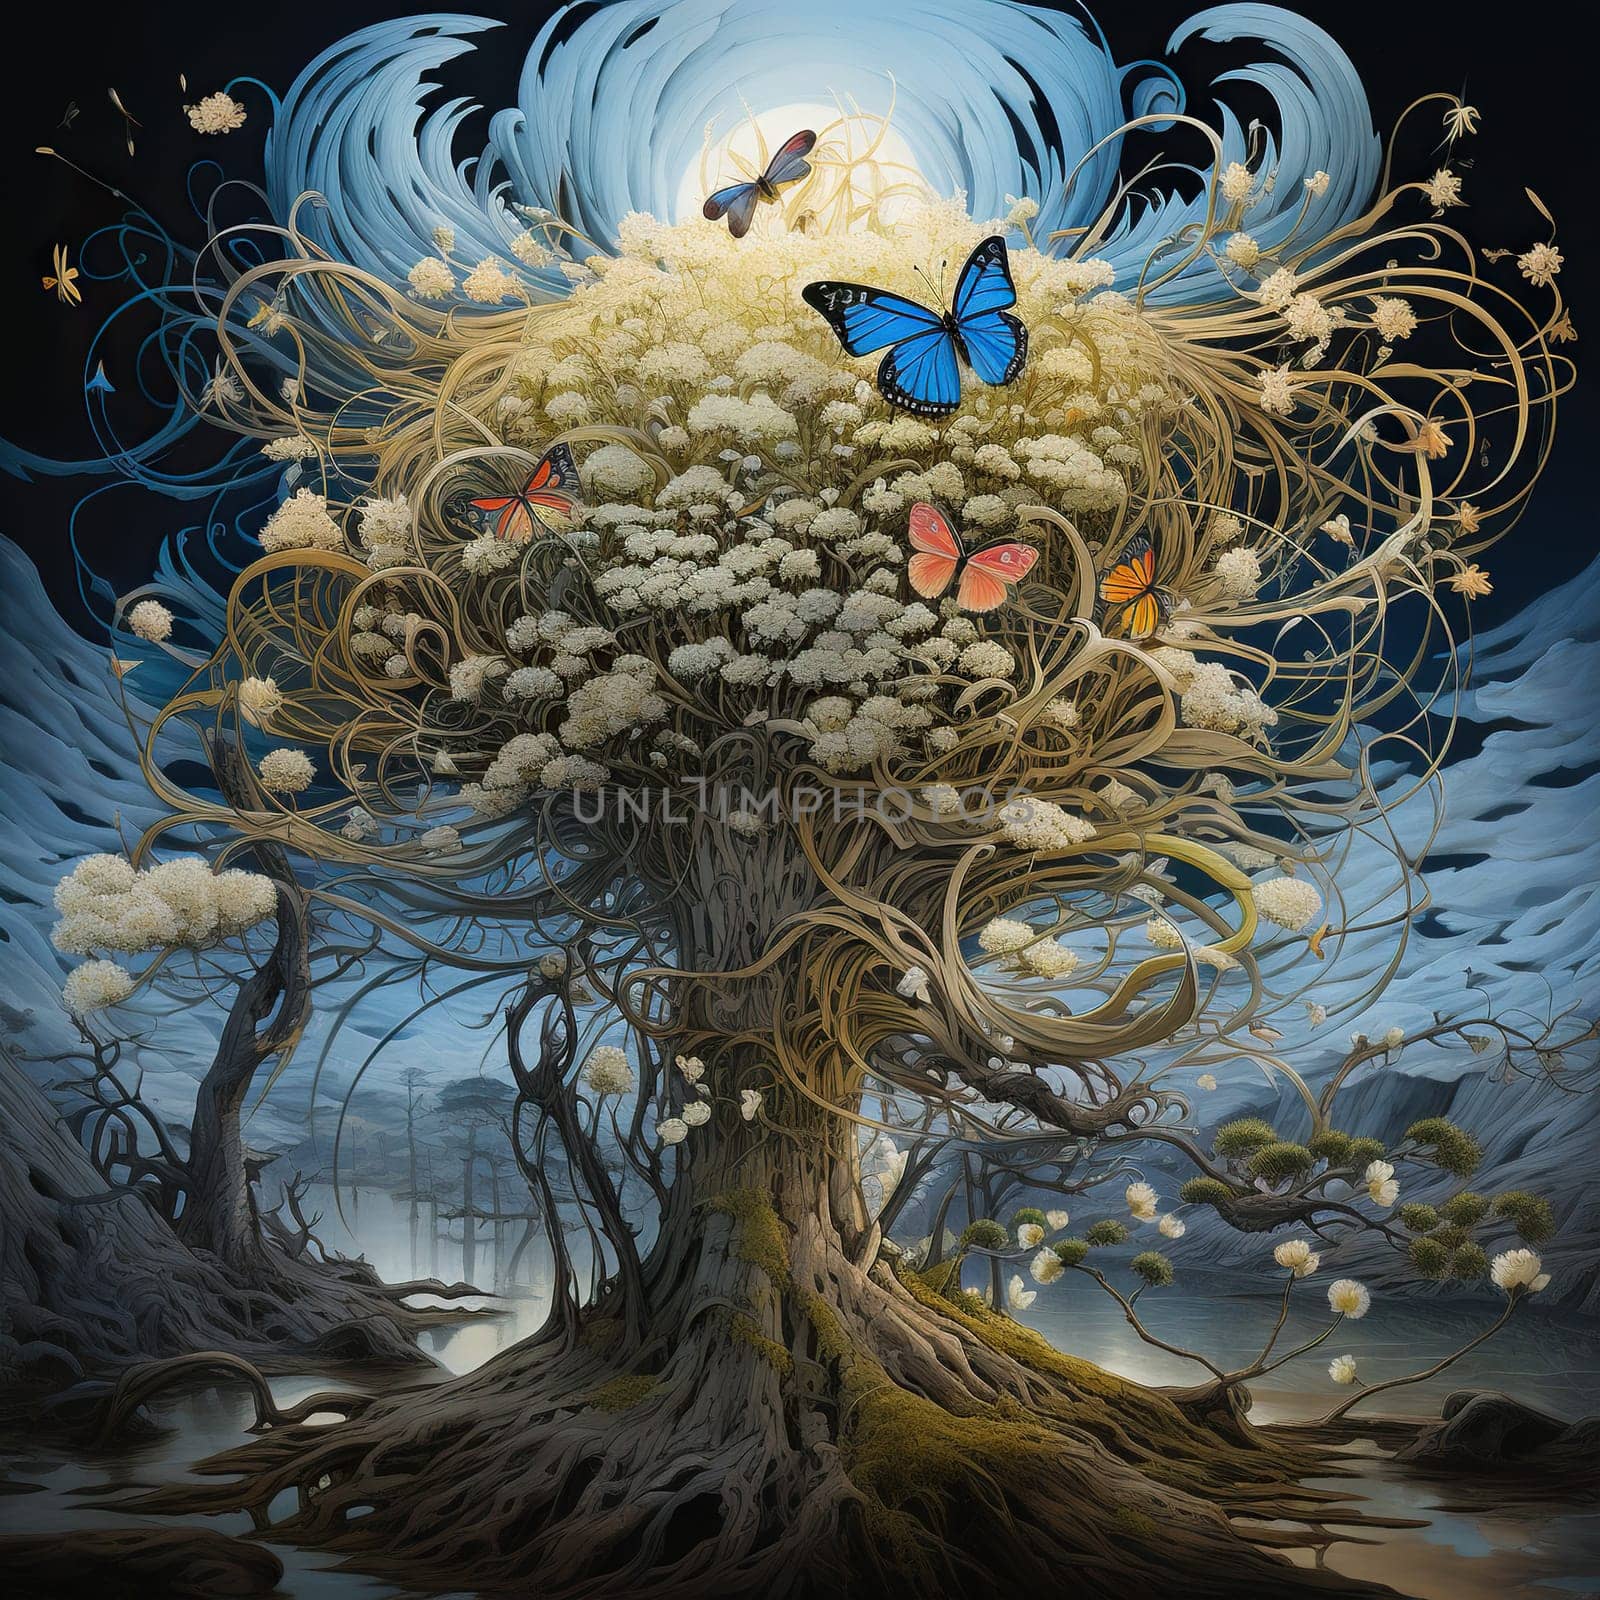 Drawing of a withered tree with flowers and butterflies on a dark background.